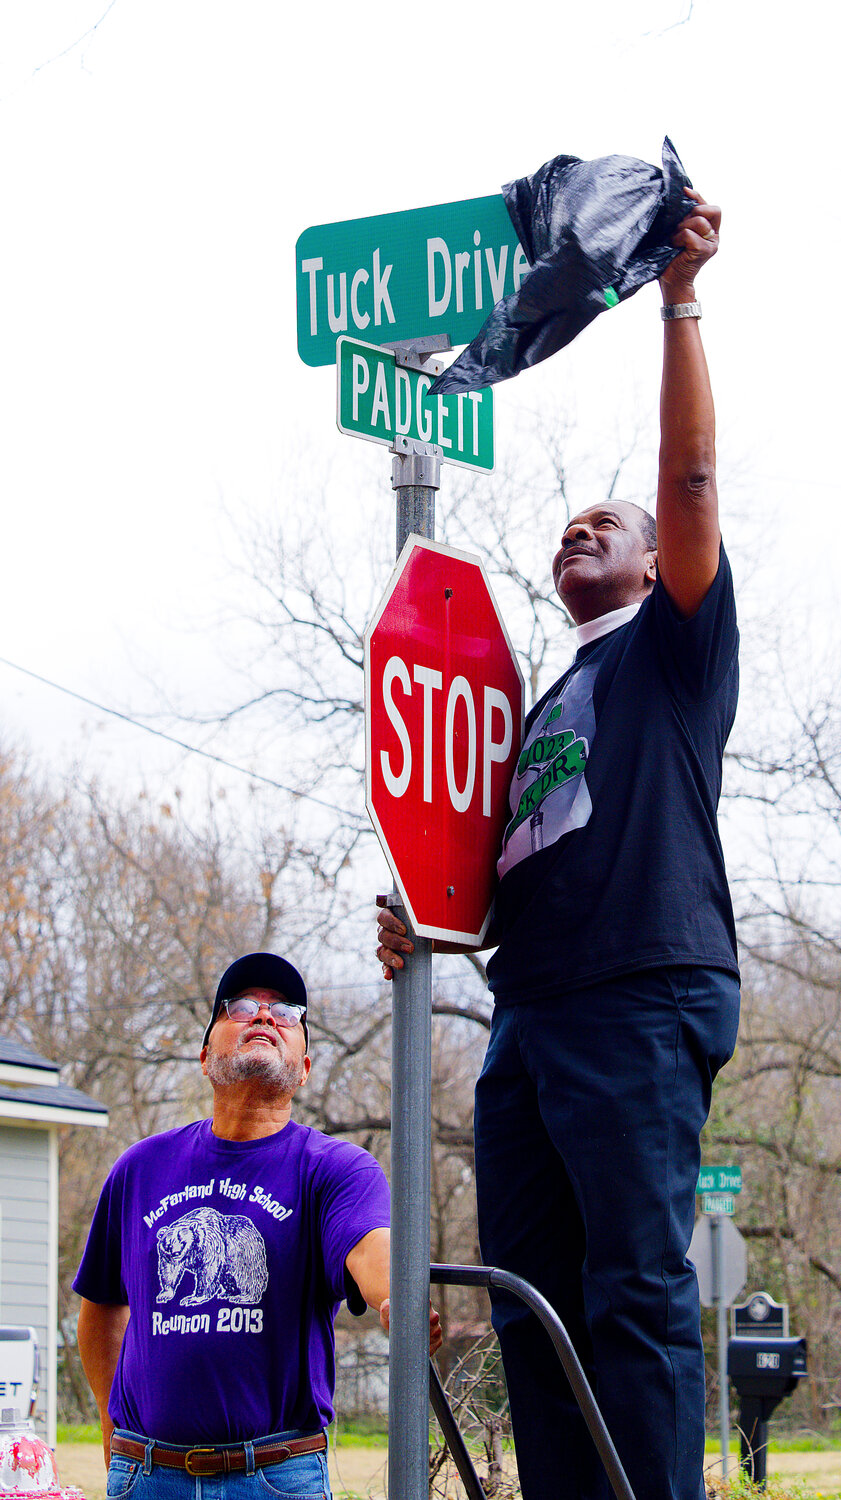 Longtime city councilman Mitch Tuck does the honors of unveiling the sign as Carlist Brinkley steadies the ladder.